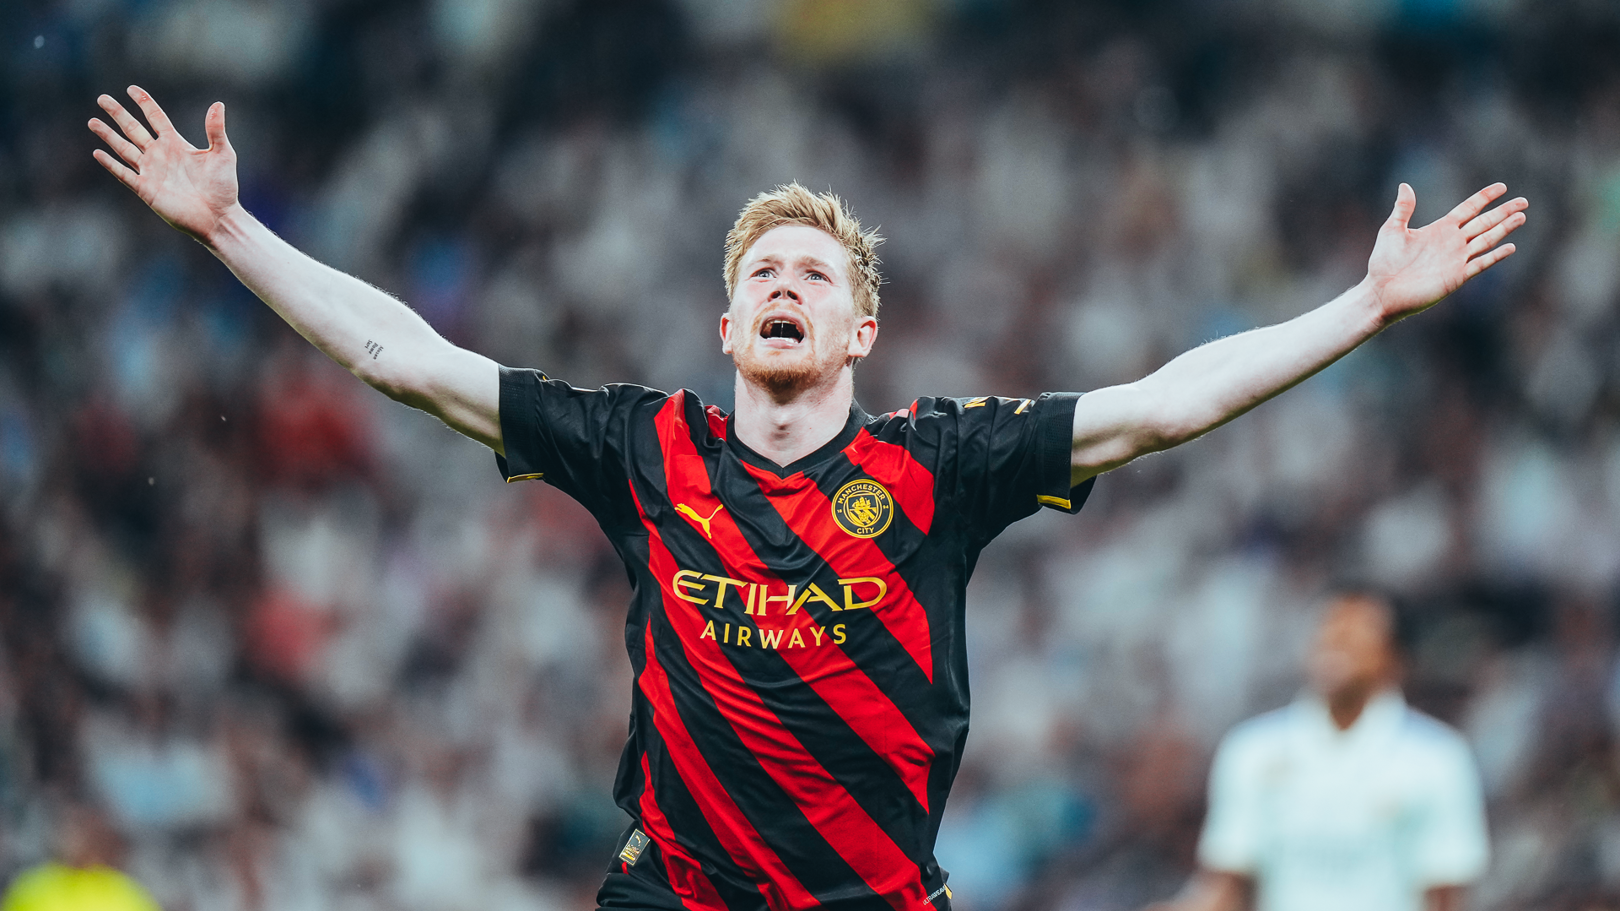 De Bruyne stunner up for Champions League goal of the week